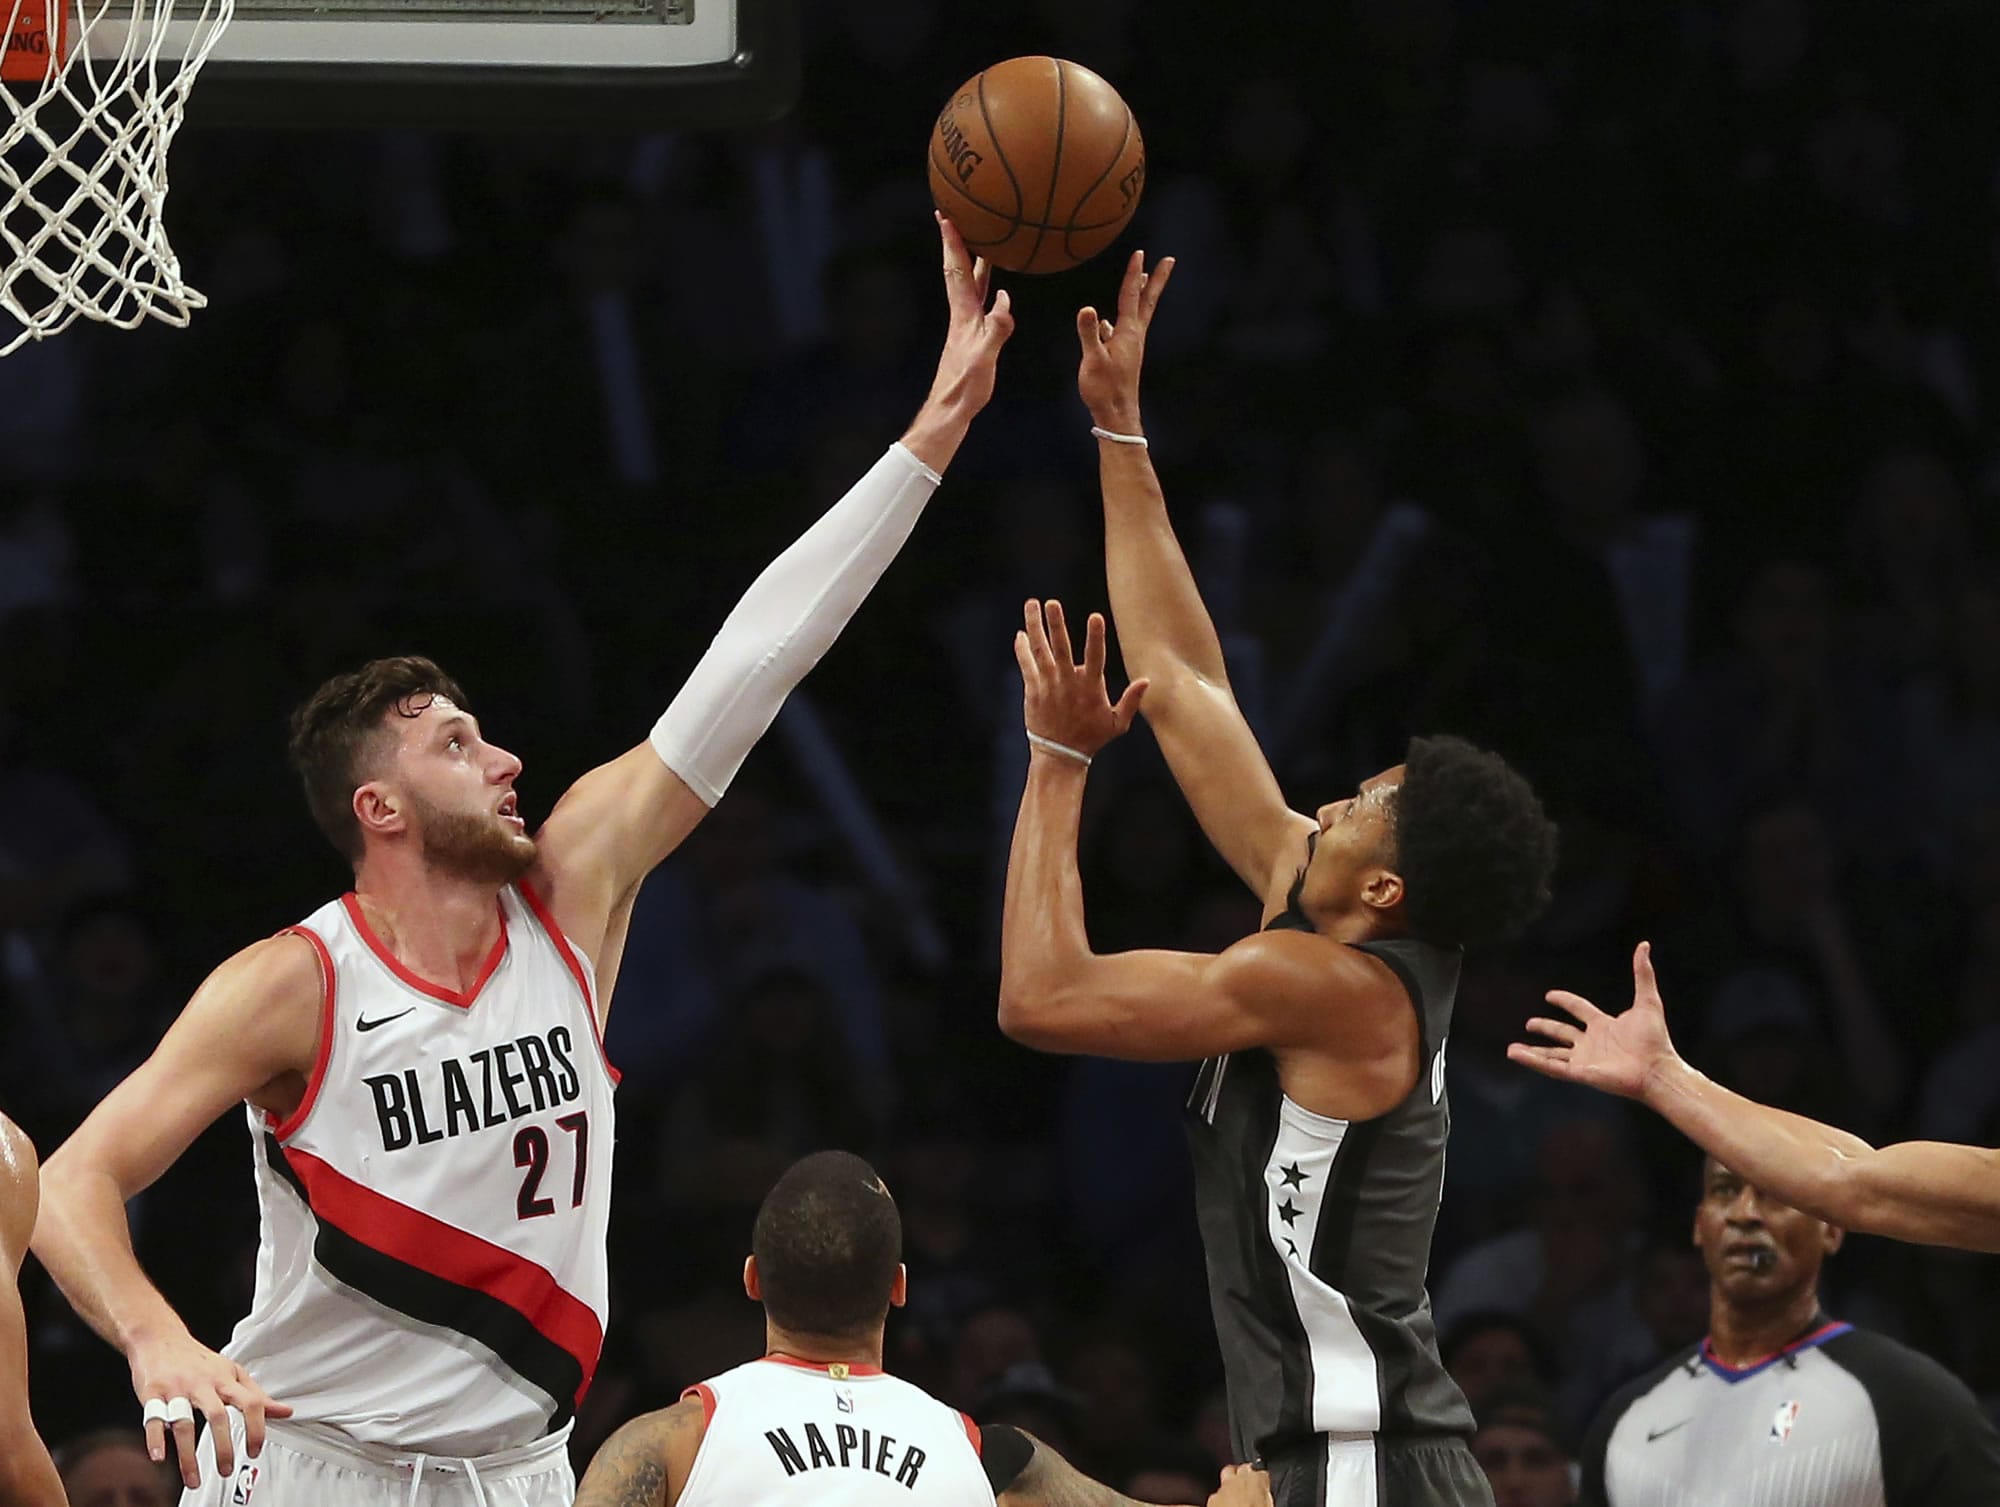 Portland Trail Blazers center Jusuf Nurkic (27) blocks a shot by Brooklyn Nets guard Spencer Dinwiddie, right, during the third quarter of an NBA basketball game in New York, Friday, Nov. 24, 2017. The Trail Blazers defeated the Nets 127-125.